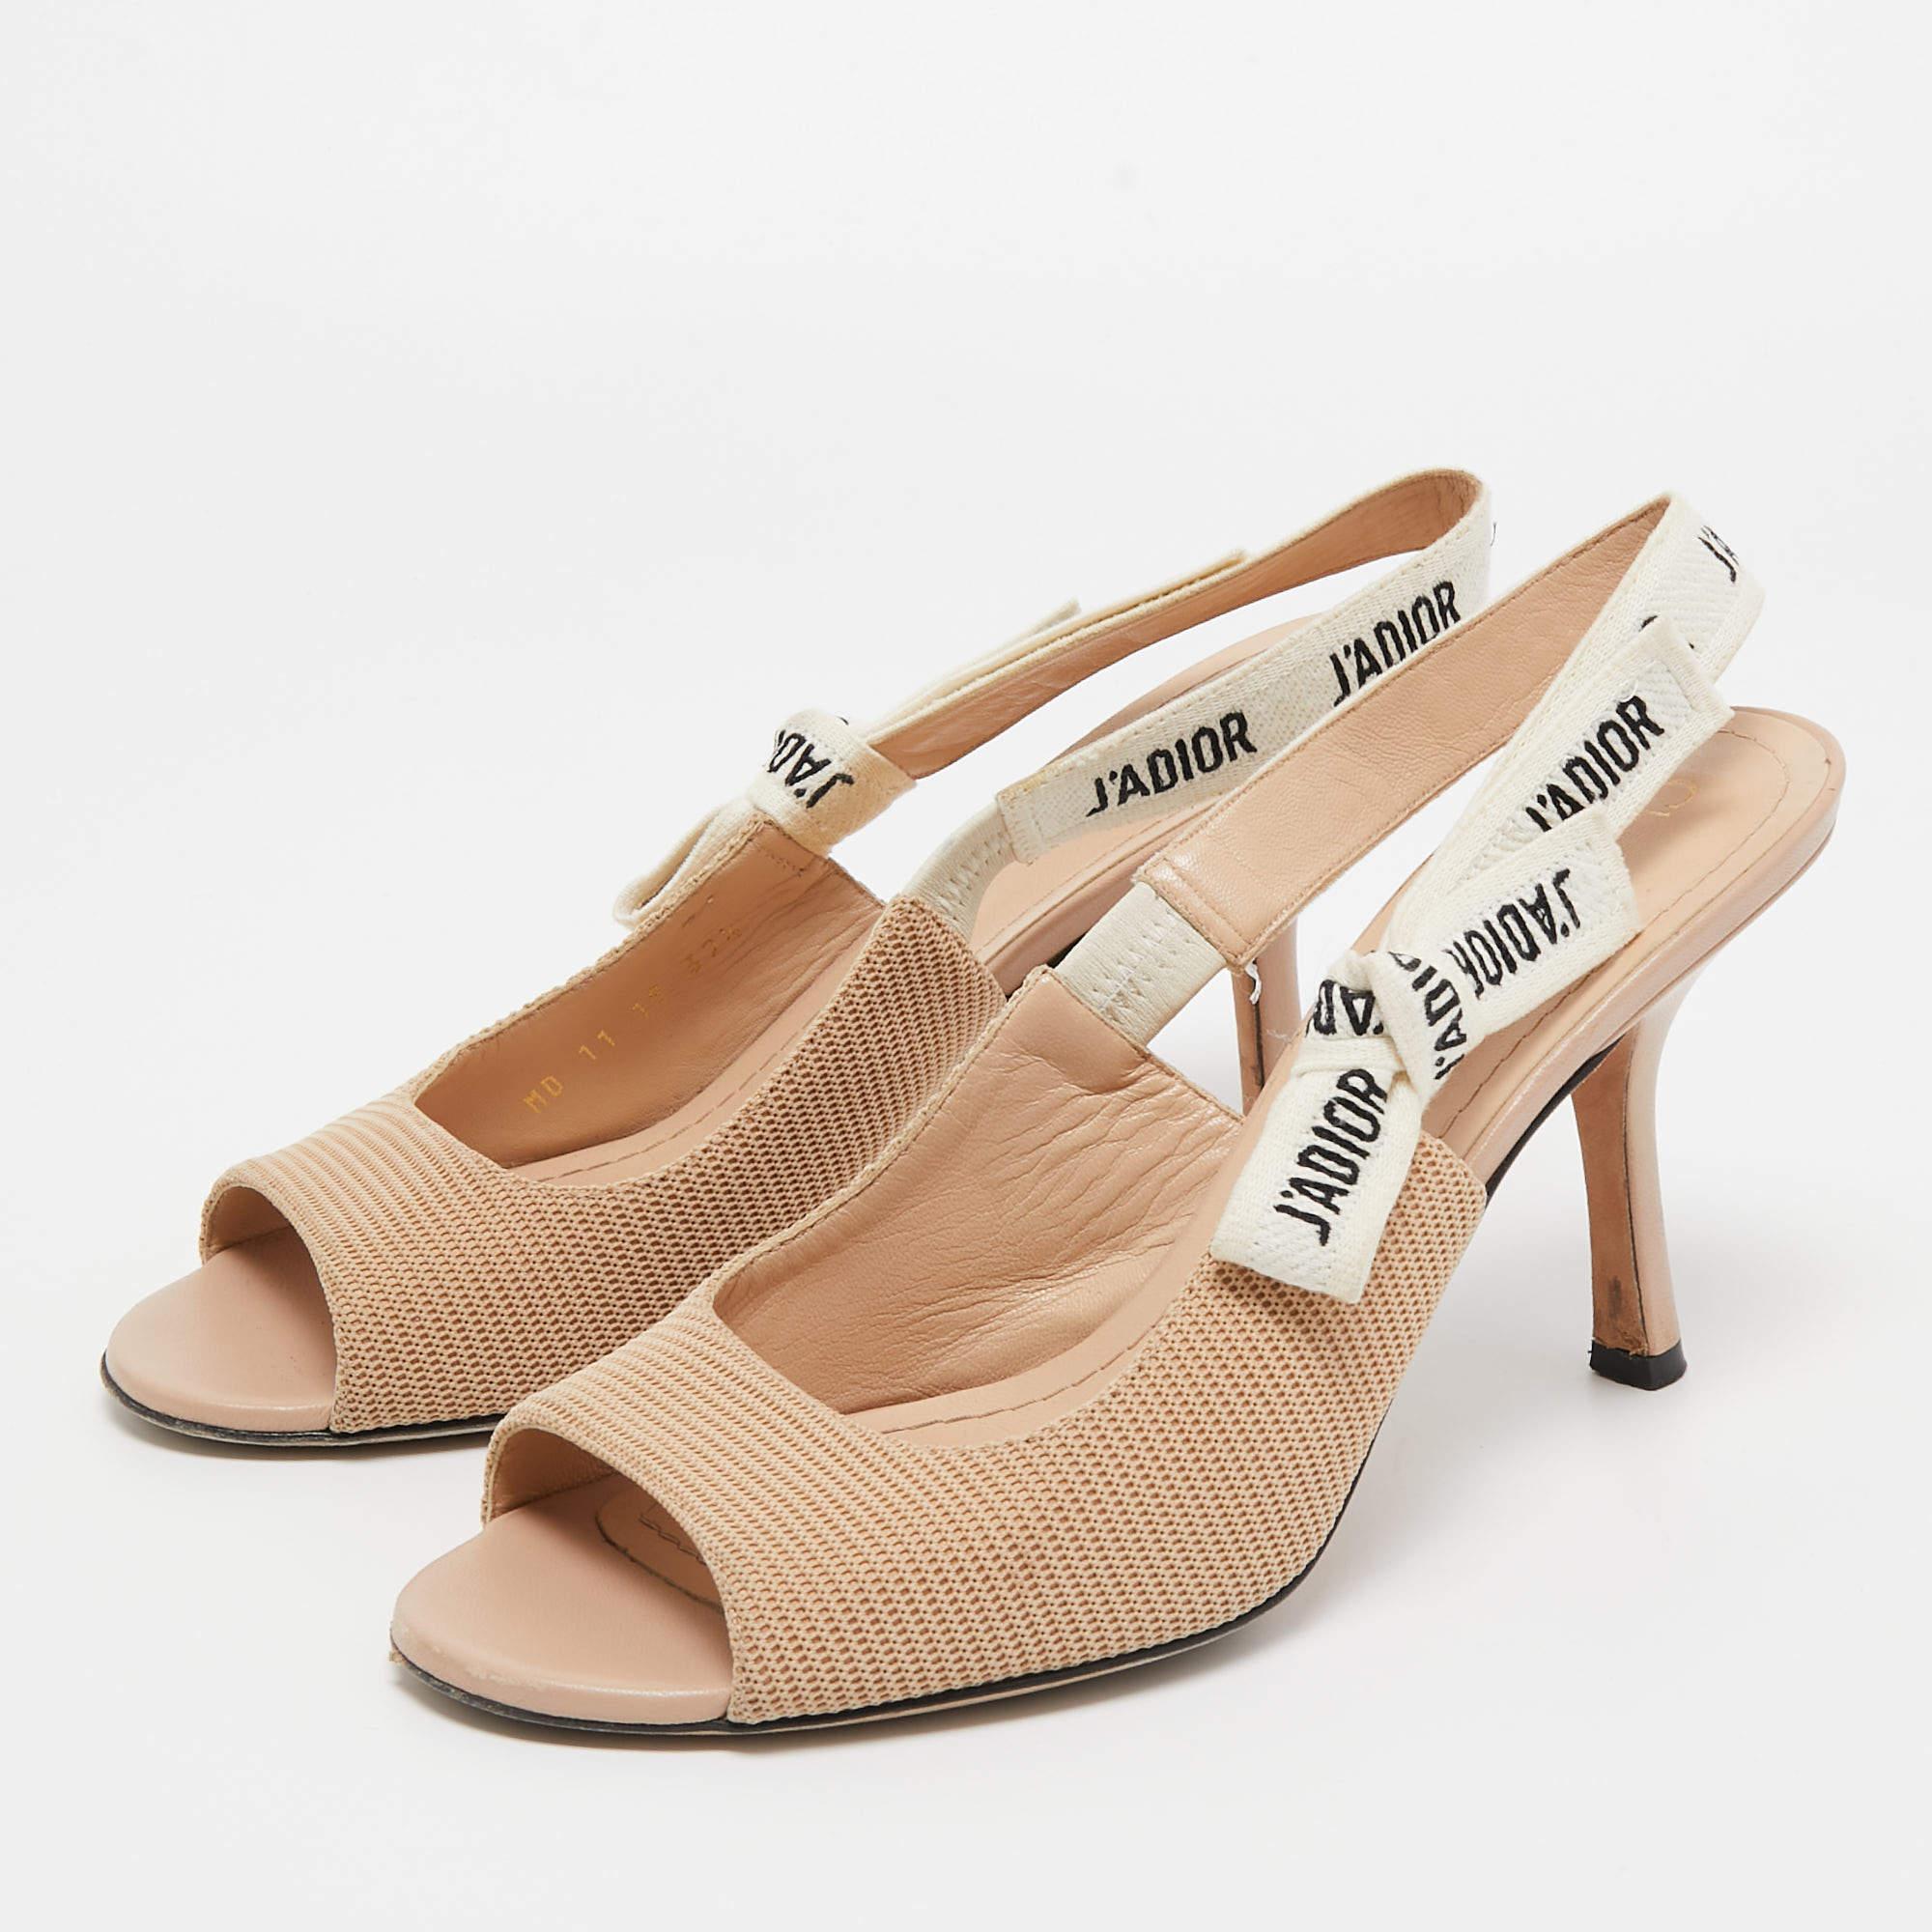 This pair of Dior pumps celebrates femininity like all other designs of the brand. Made from beige canvas the creation is highlighted with a 'J'adior' detailed slingback closure, and the sharp silhouette is balanced on 11cm heels.

